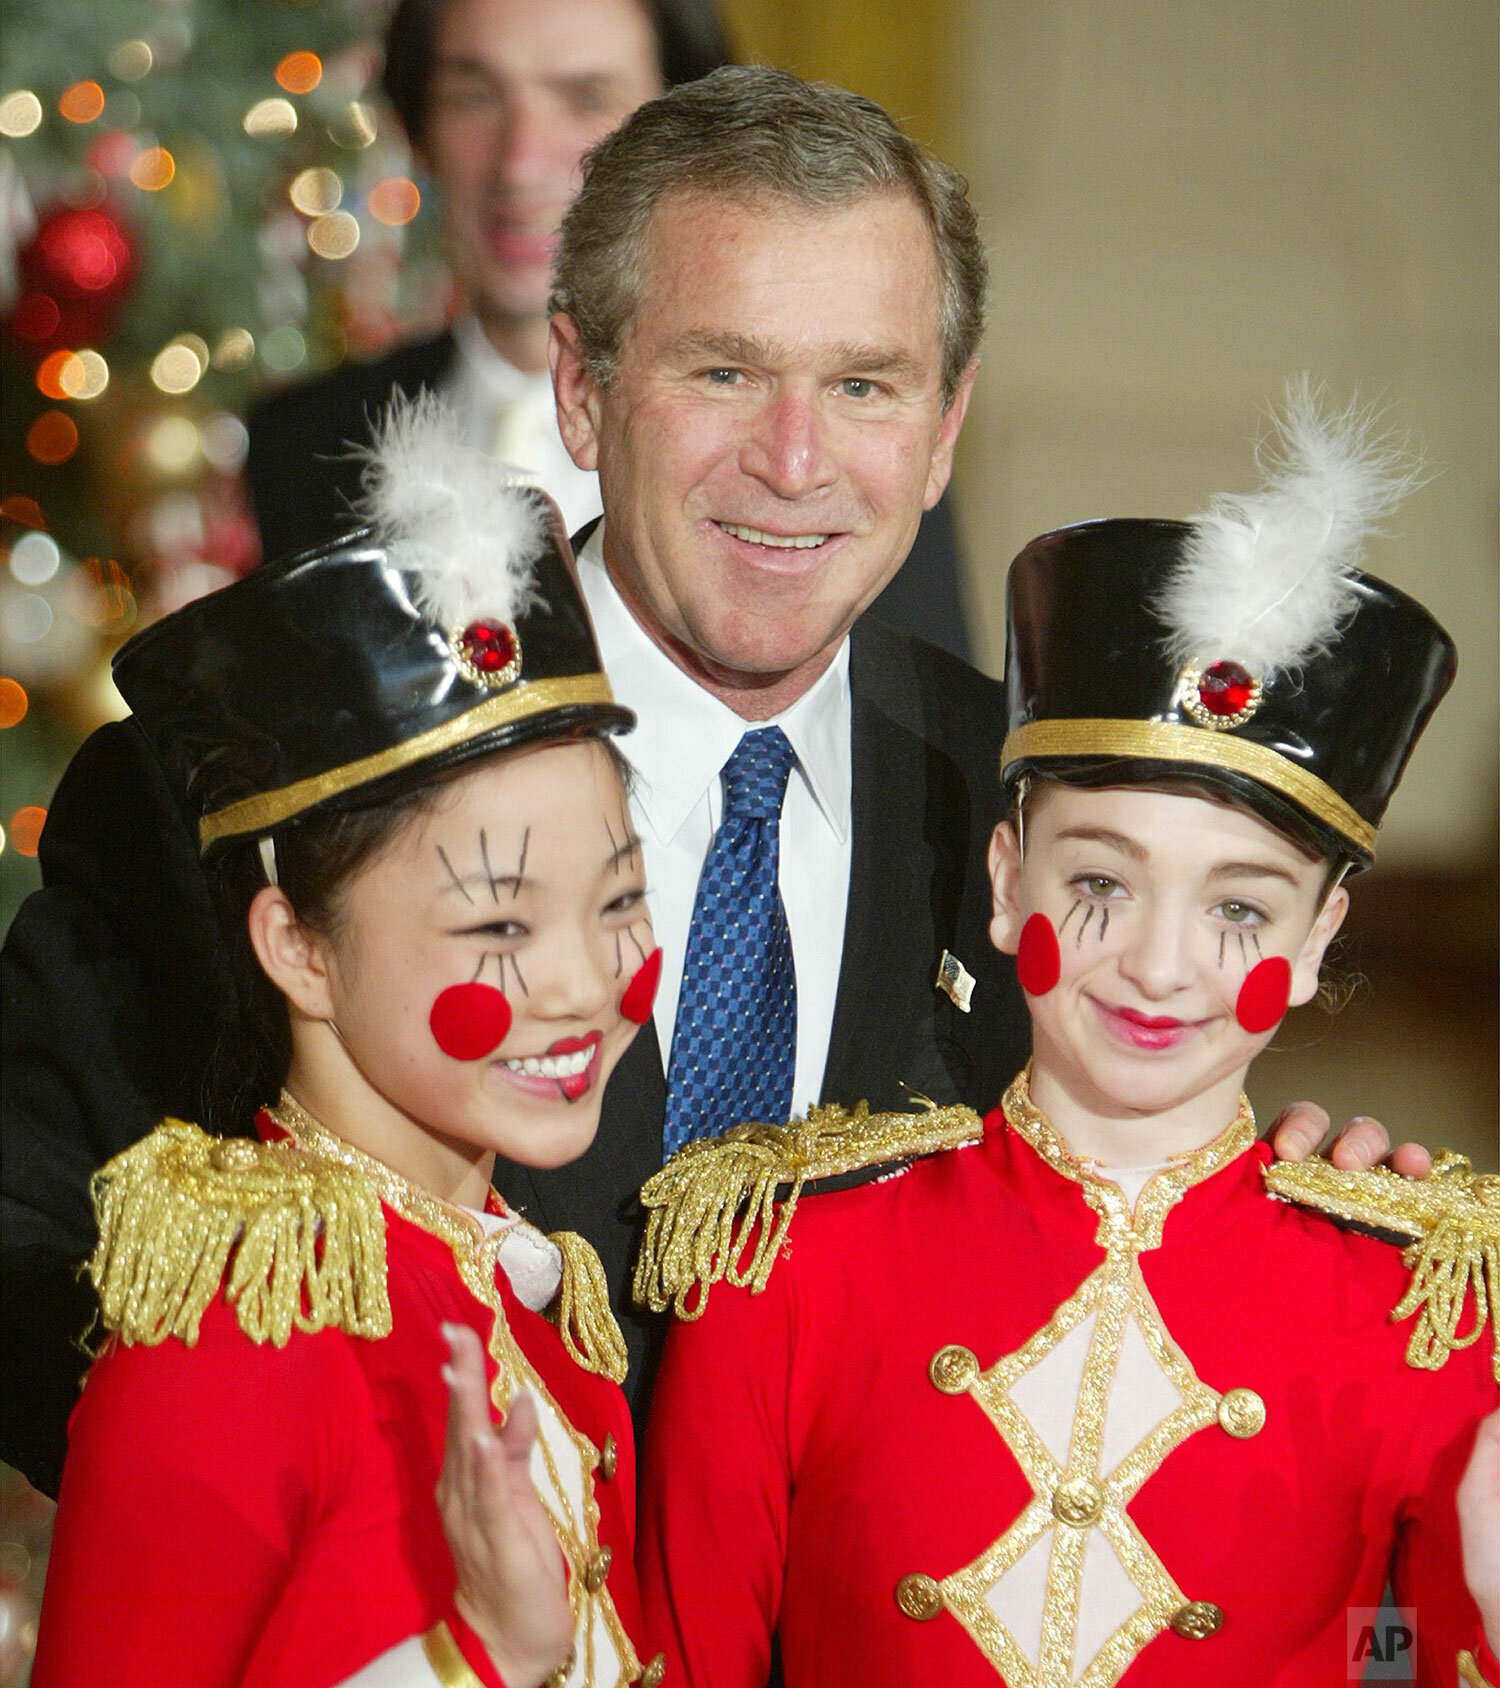  President Bush poses with unidentified members of the Washington Ballet that performed in a children's Christmas reception program Monday, Dec. 8, 2003, at the White House in Washington for local children of military families. (AP Photo/Ron Edmonds)